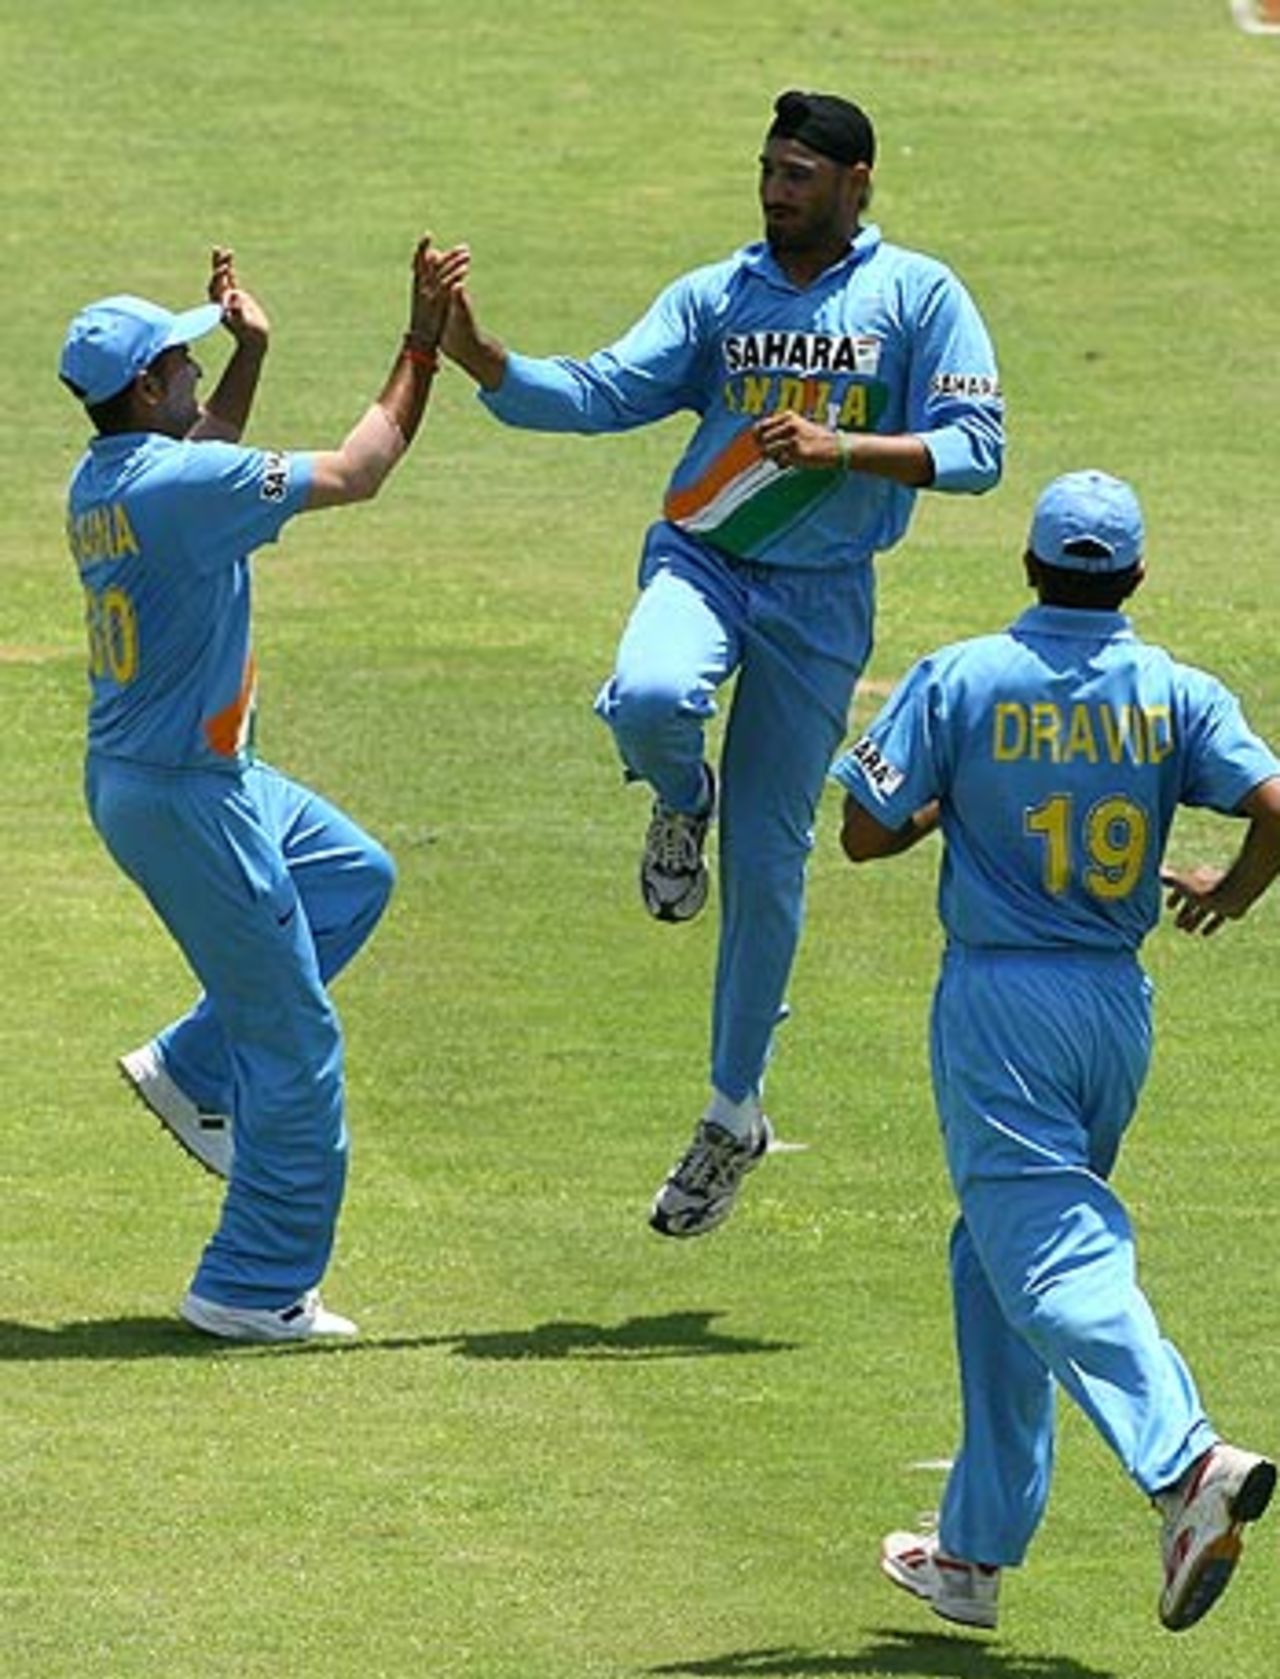 ...and then they all did the <i>bhangra</i> - Harbhajan Singh celebrates a wicket at Kingston, West Indies v India, 2nd ODI, Kingston, May 20, 2006